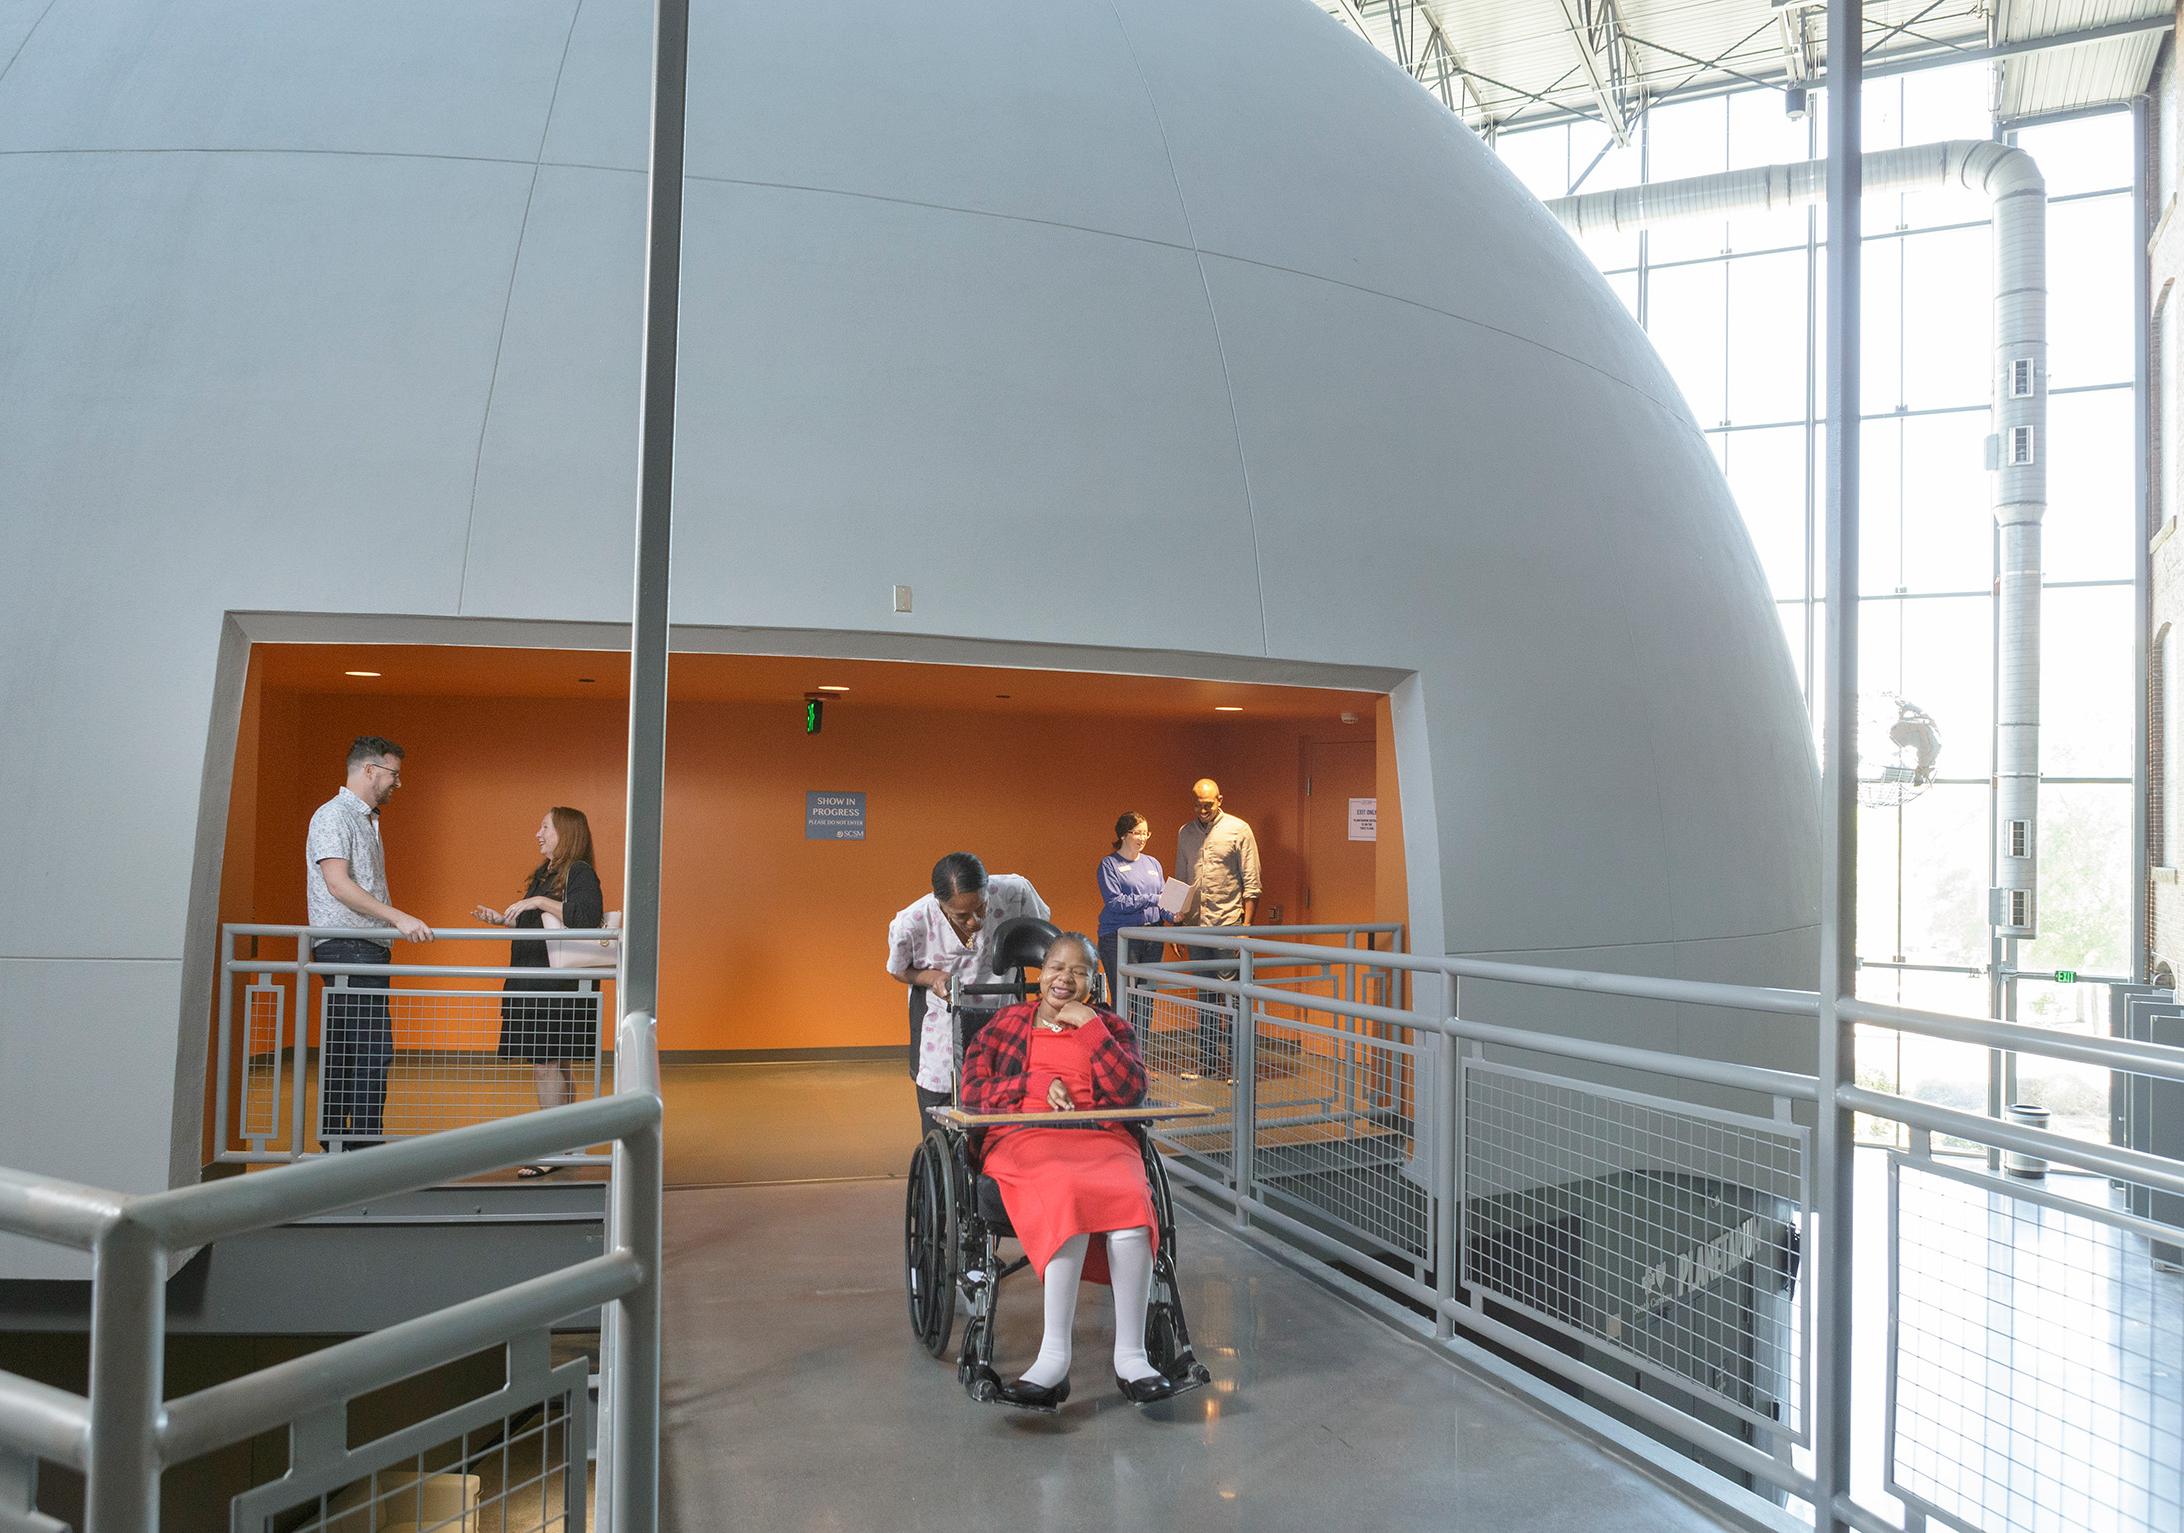 Large dome structure with exit midway up onto a catwalk space. Guest in wheelchair is on catwalk with caretaker and other guests in the background.